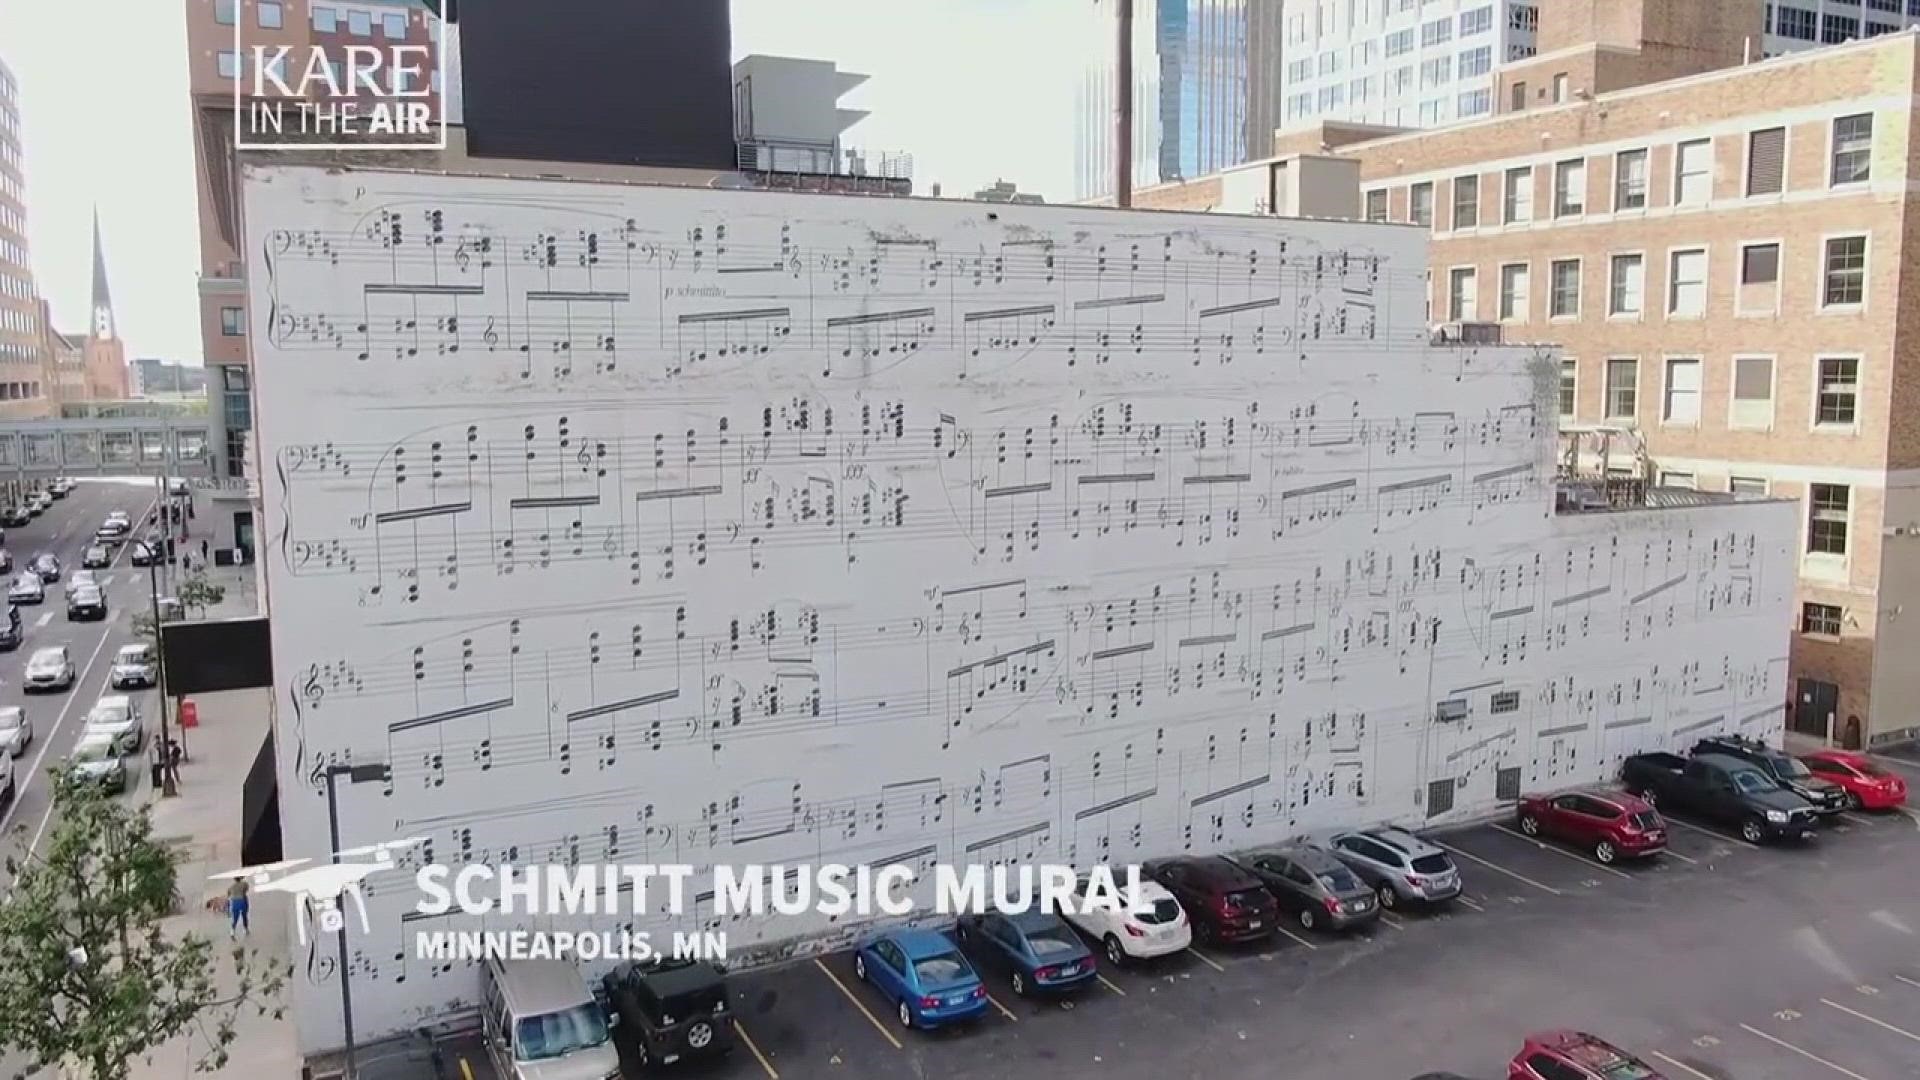 A bird's-eye view of the one-of-a-kind murals across downtown Minneapolis.